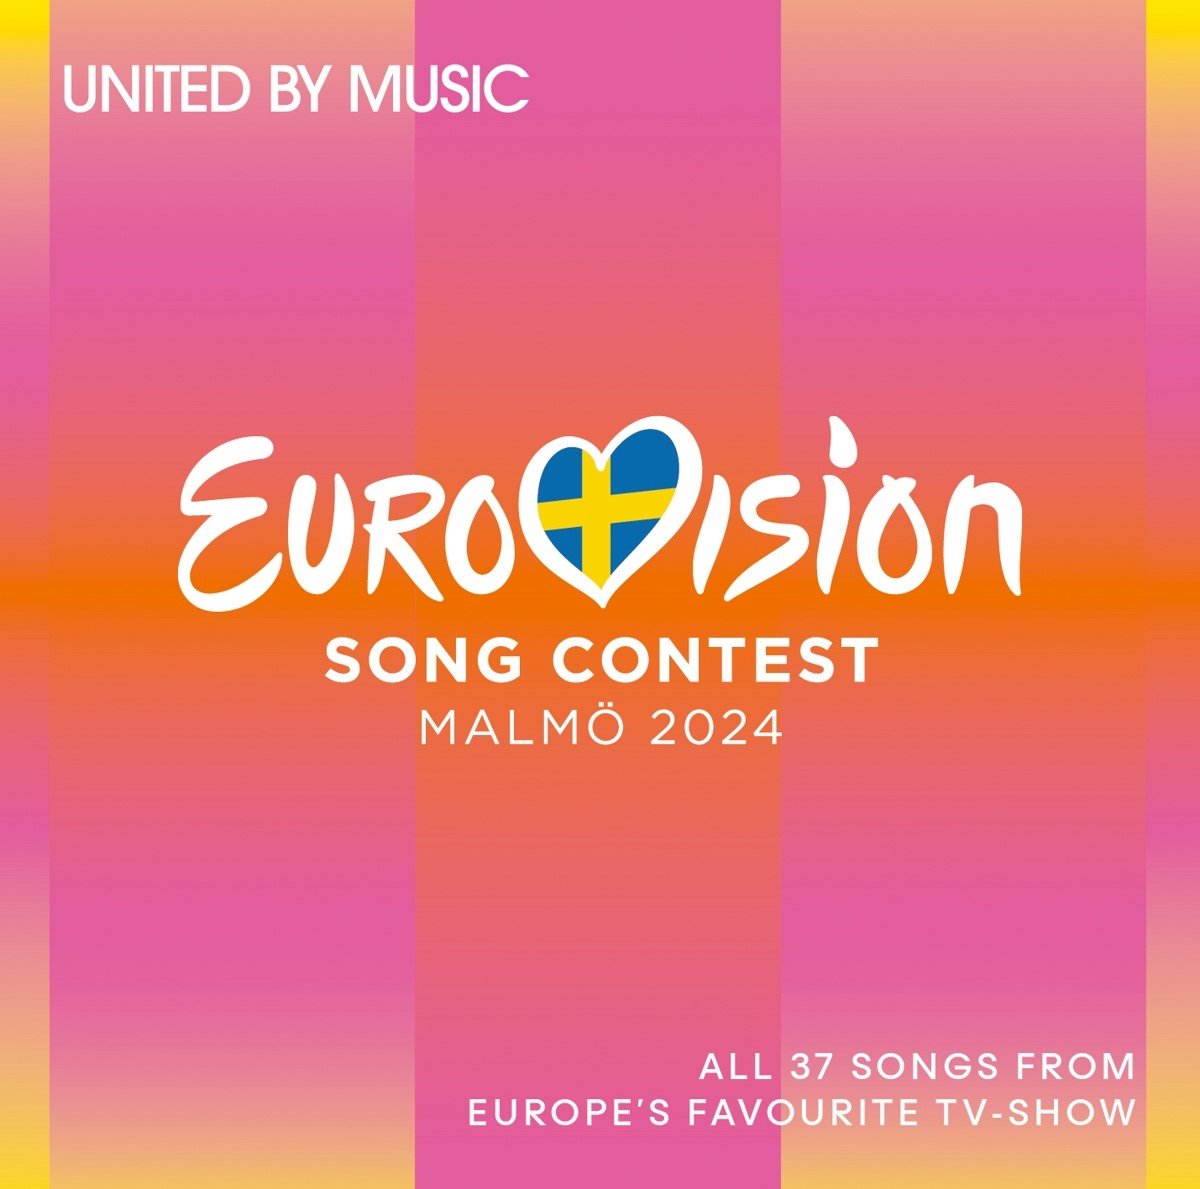 Various Artists - Eurovision Song Contest Malmö 2024 (2 CD) - various artists